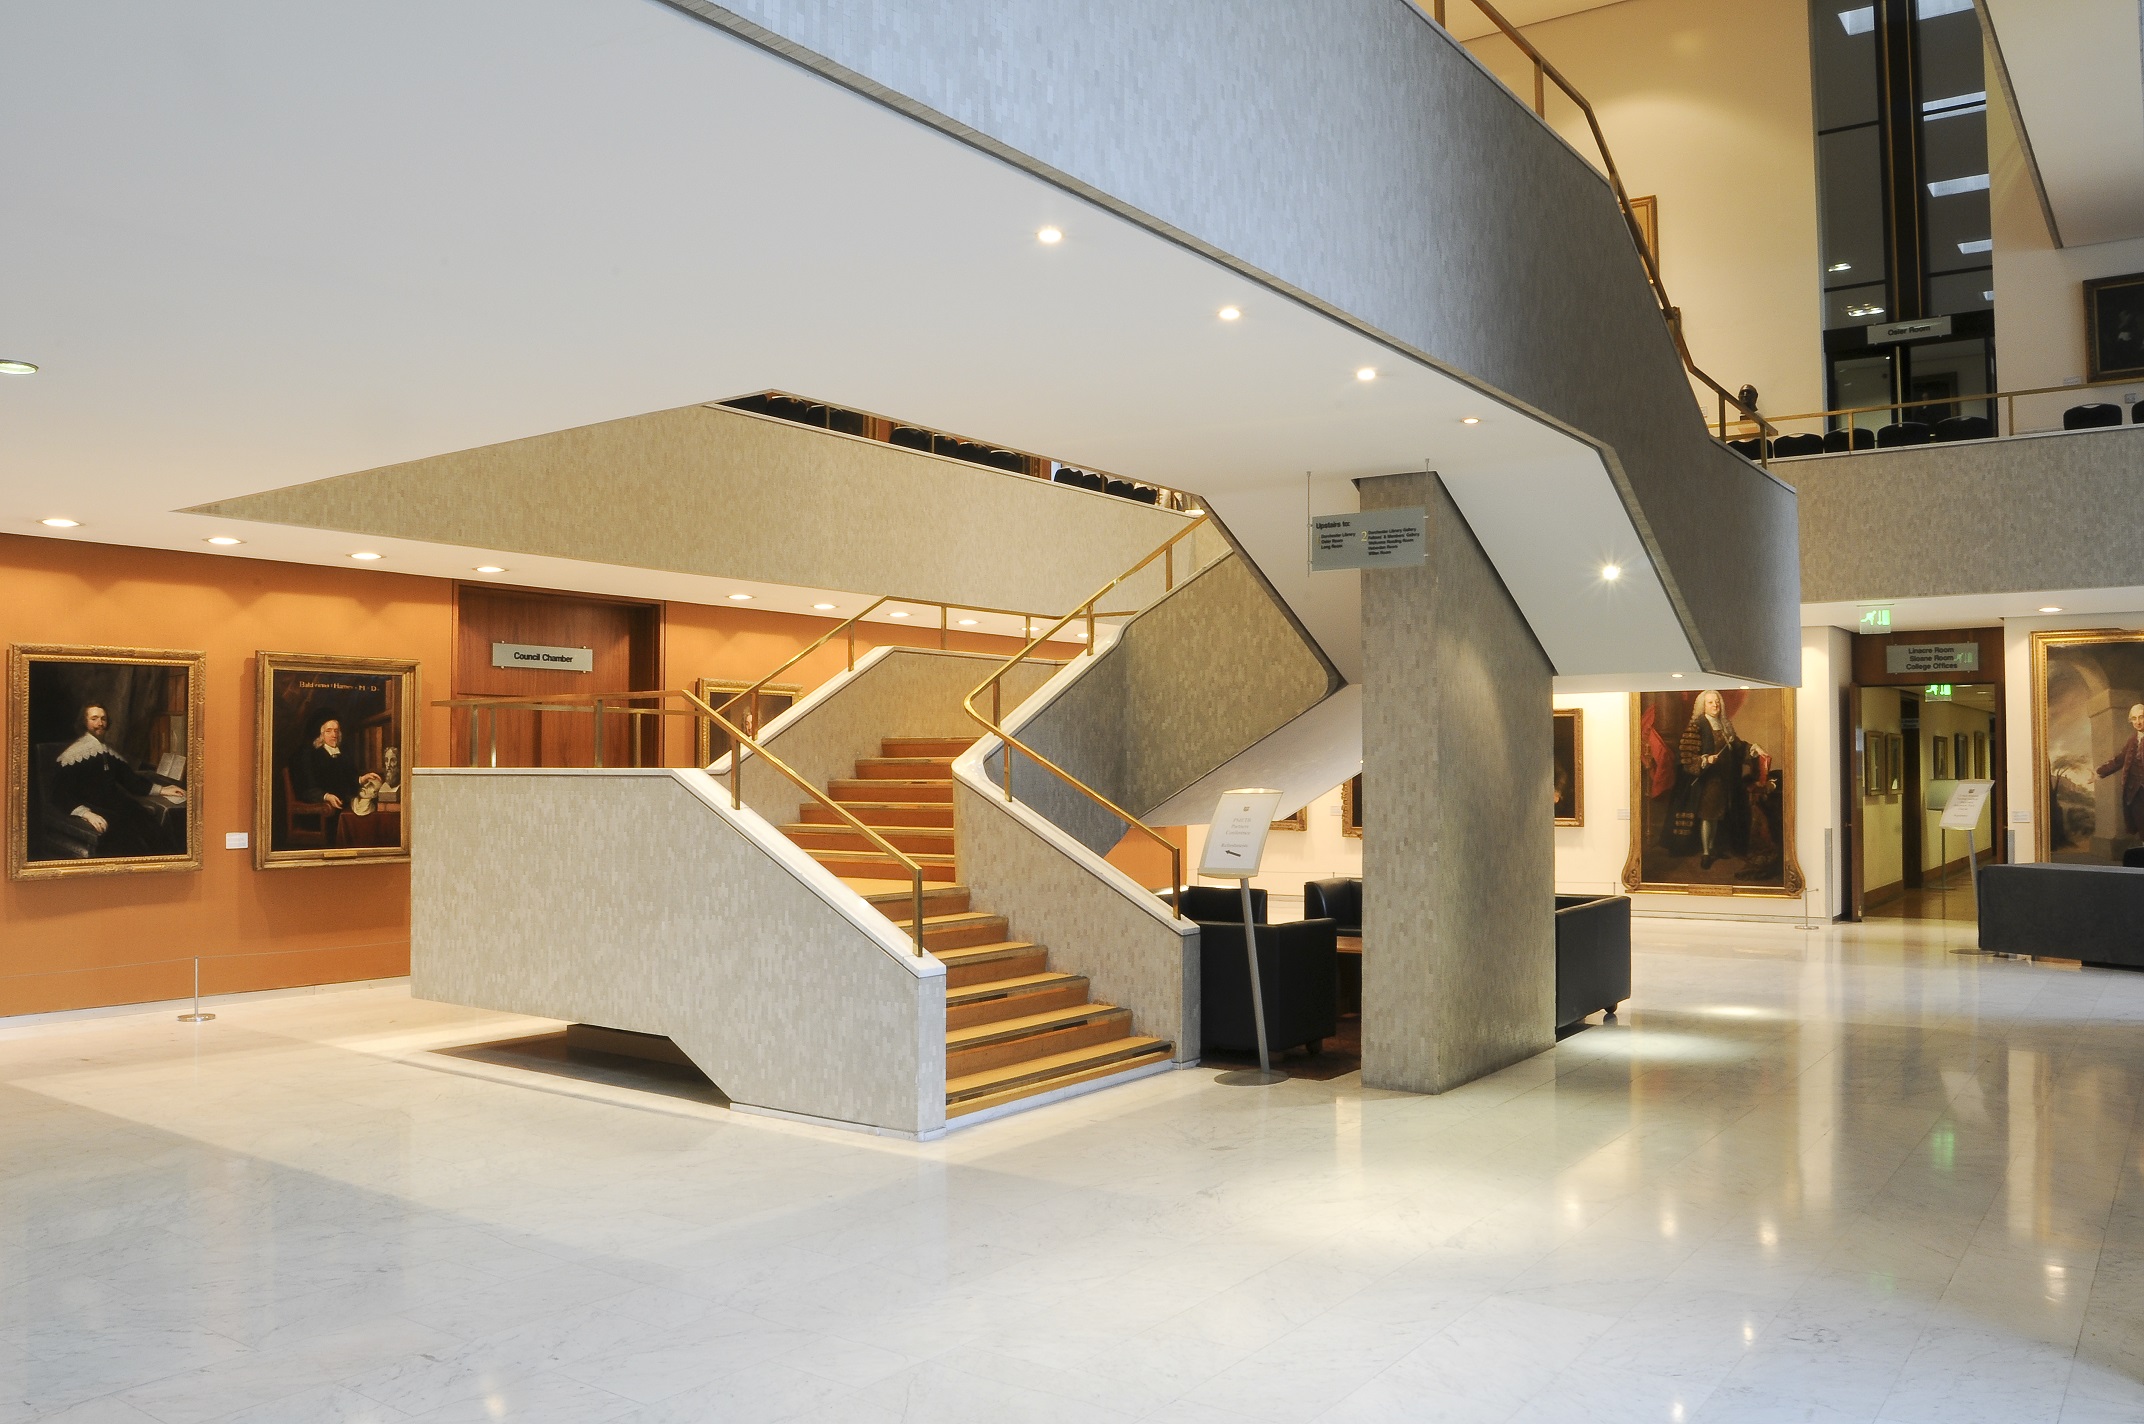 Central staircase in Lasdun Hall at the Royal College of Physicians